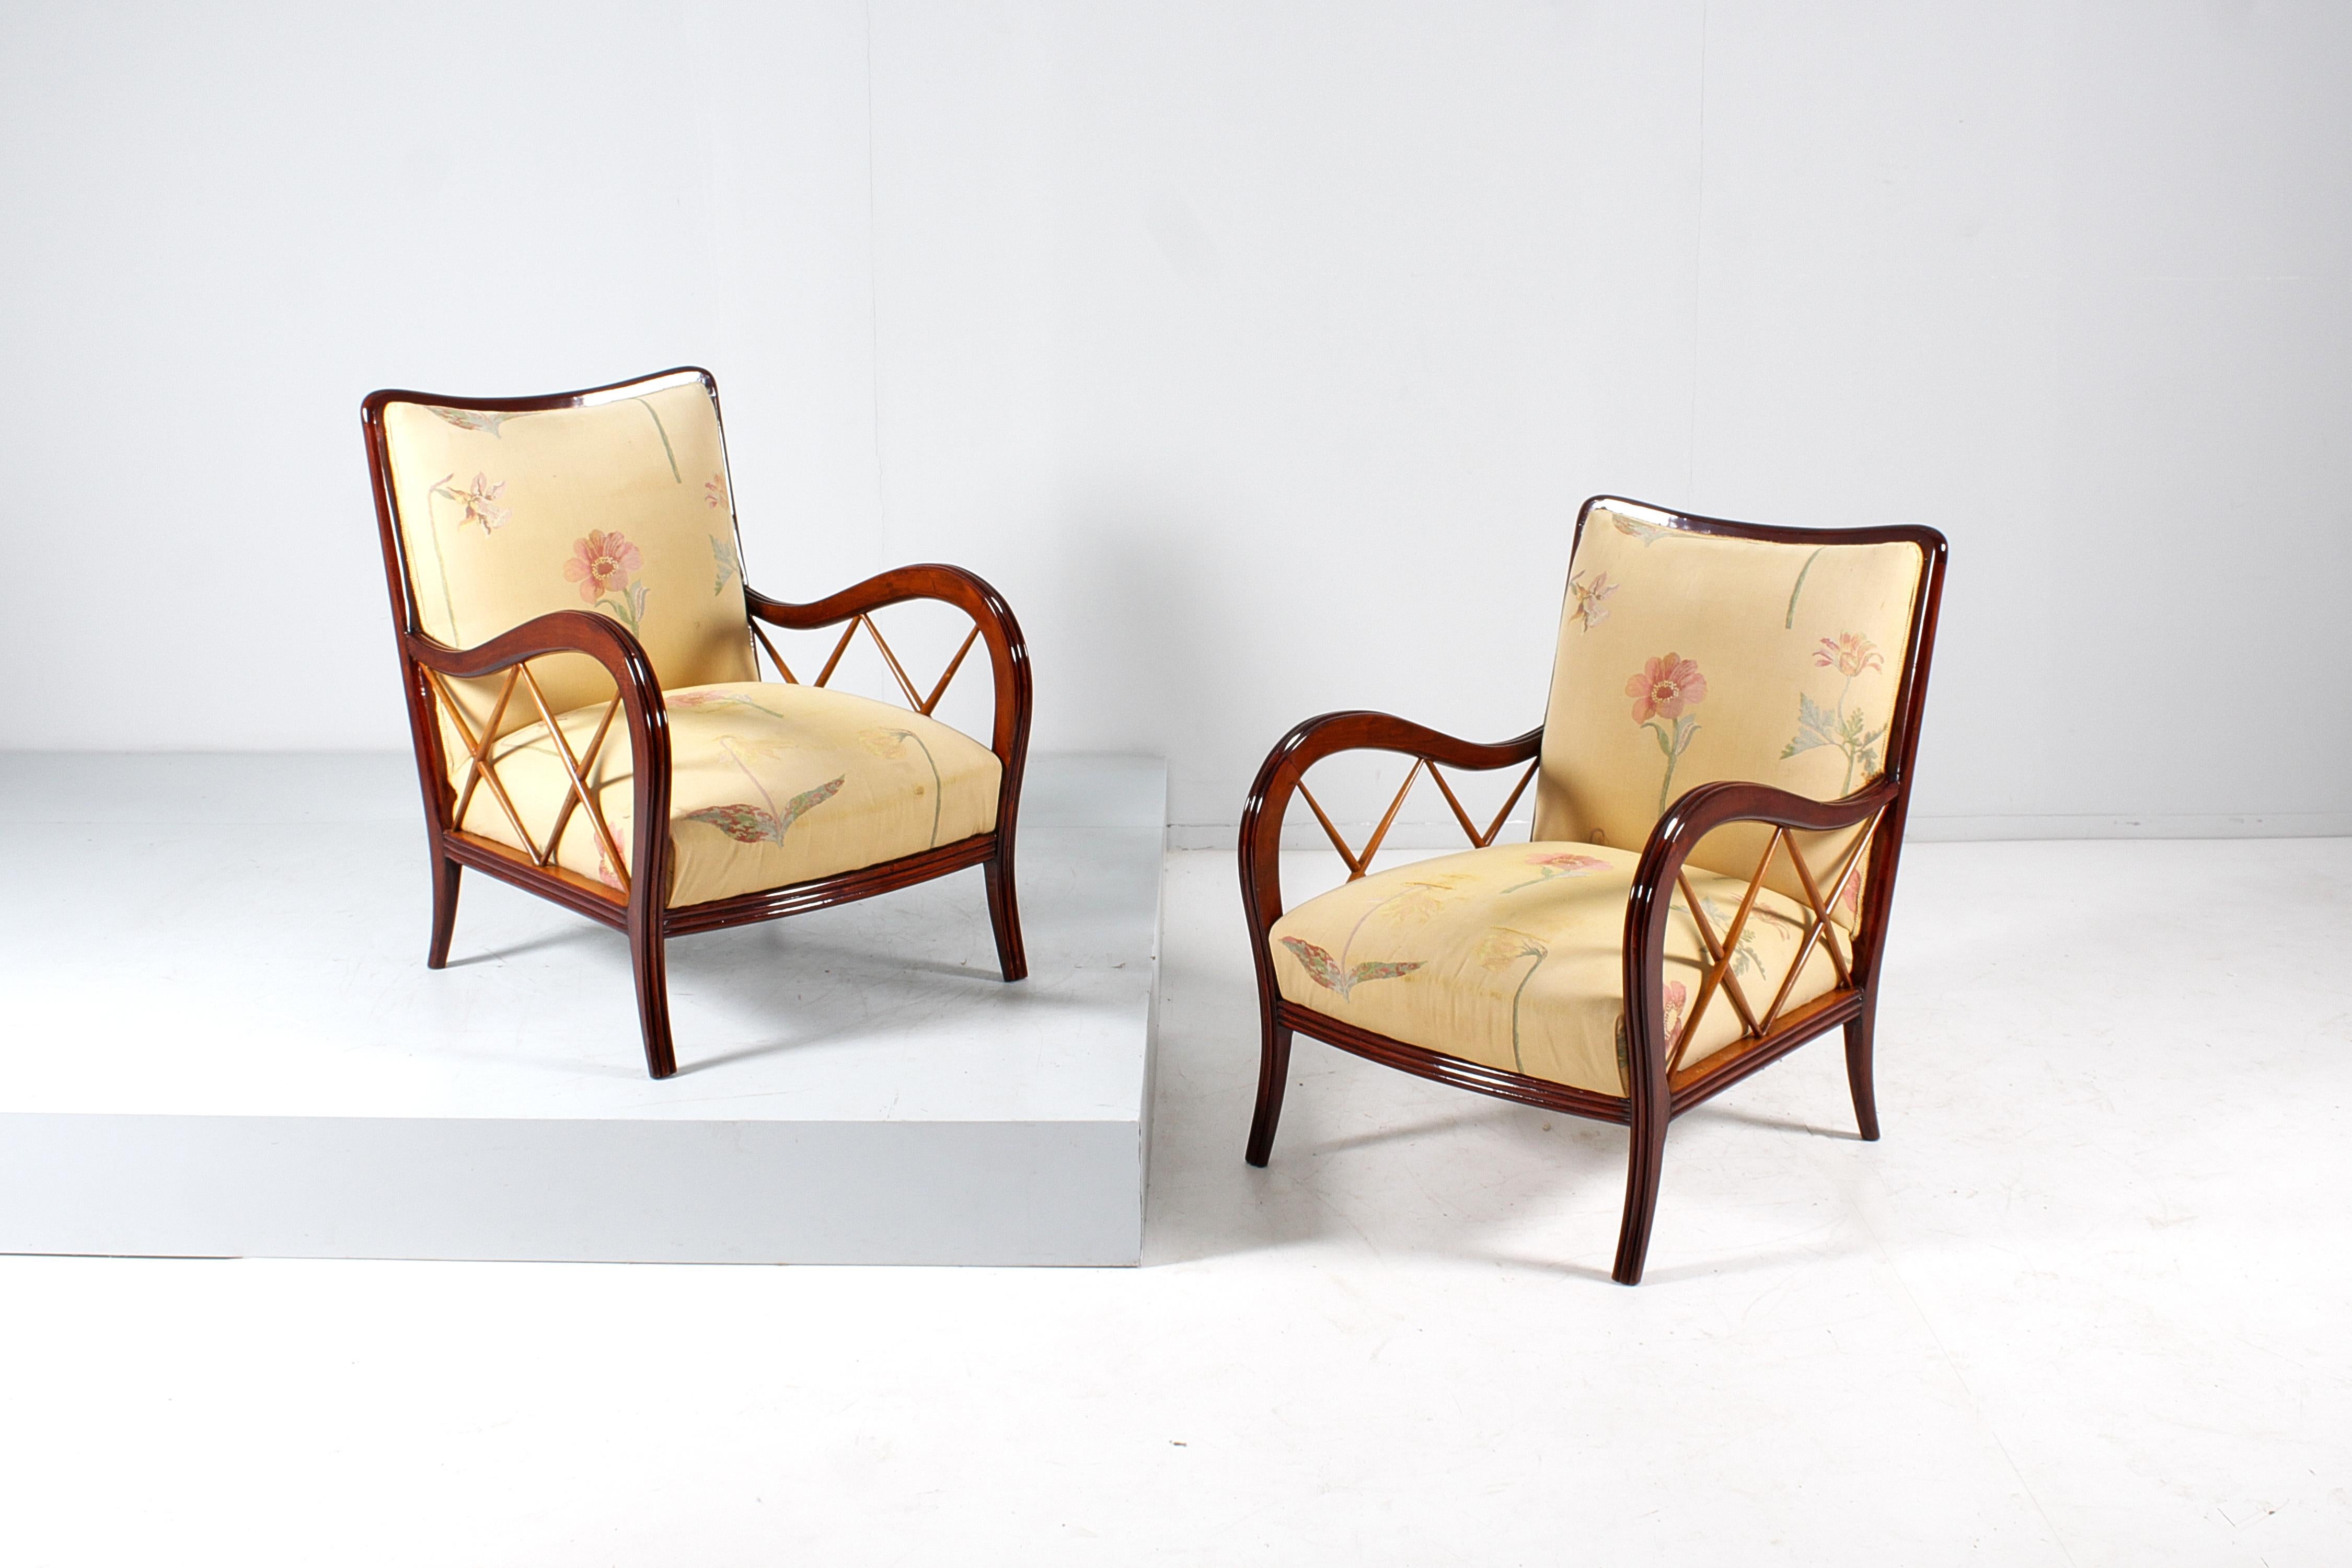 Beautiful set of two armchairs with curved wooden structure and armrests, padded seat and backrest covered in beige flowered fabric. Attributable to Paolo Buffa, Italian manufacture from the 1940s
Wear consistent with age and use.